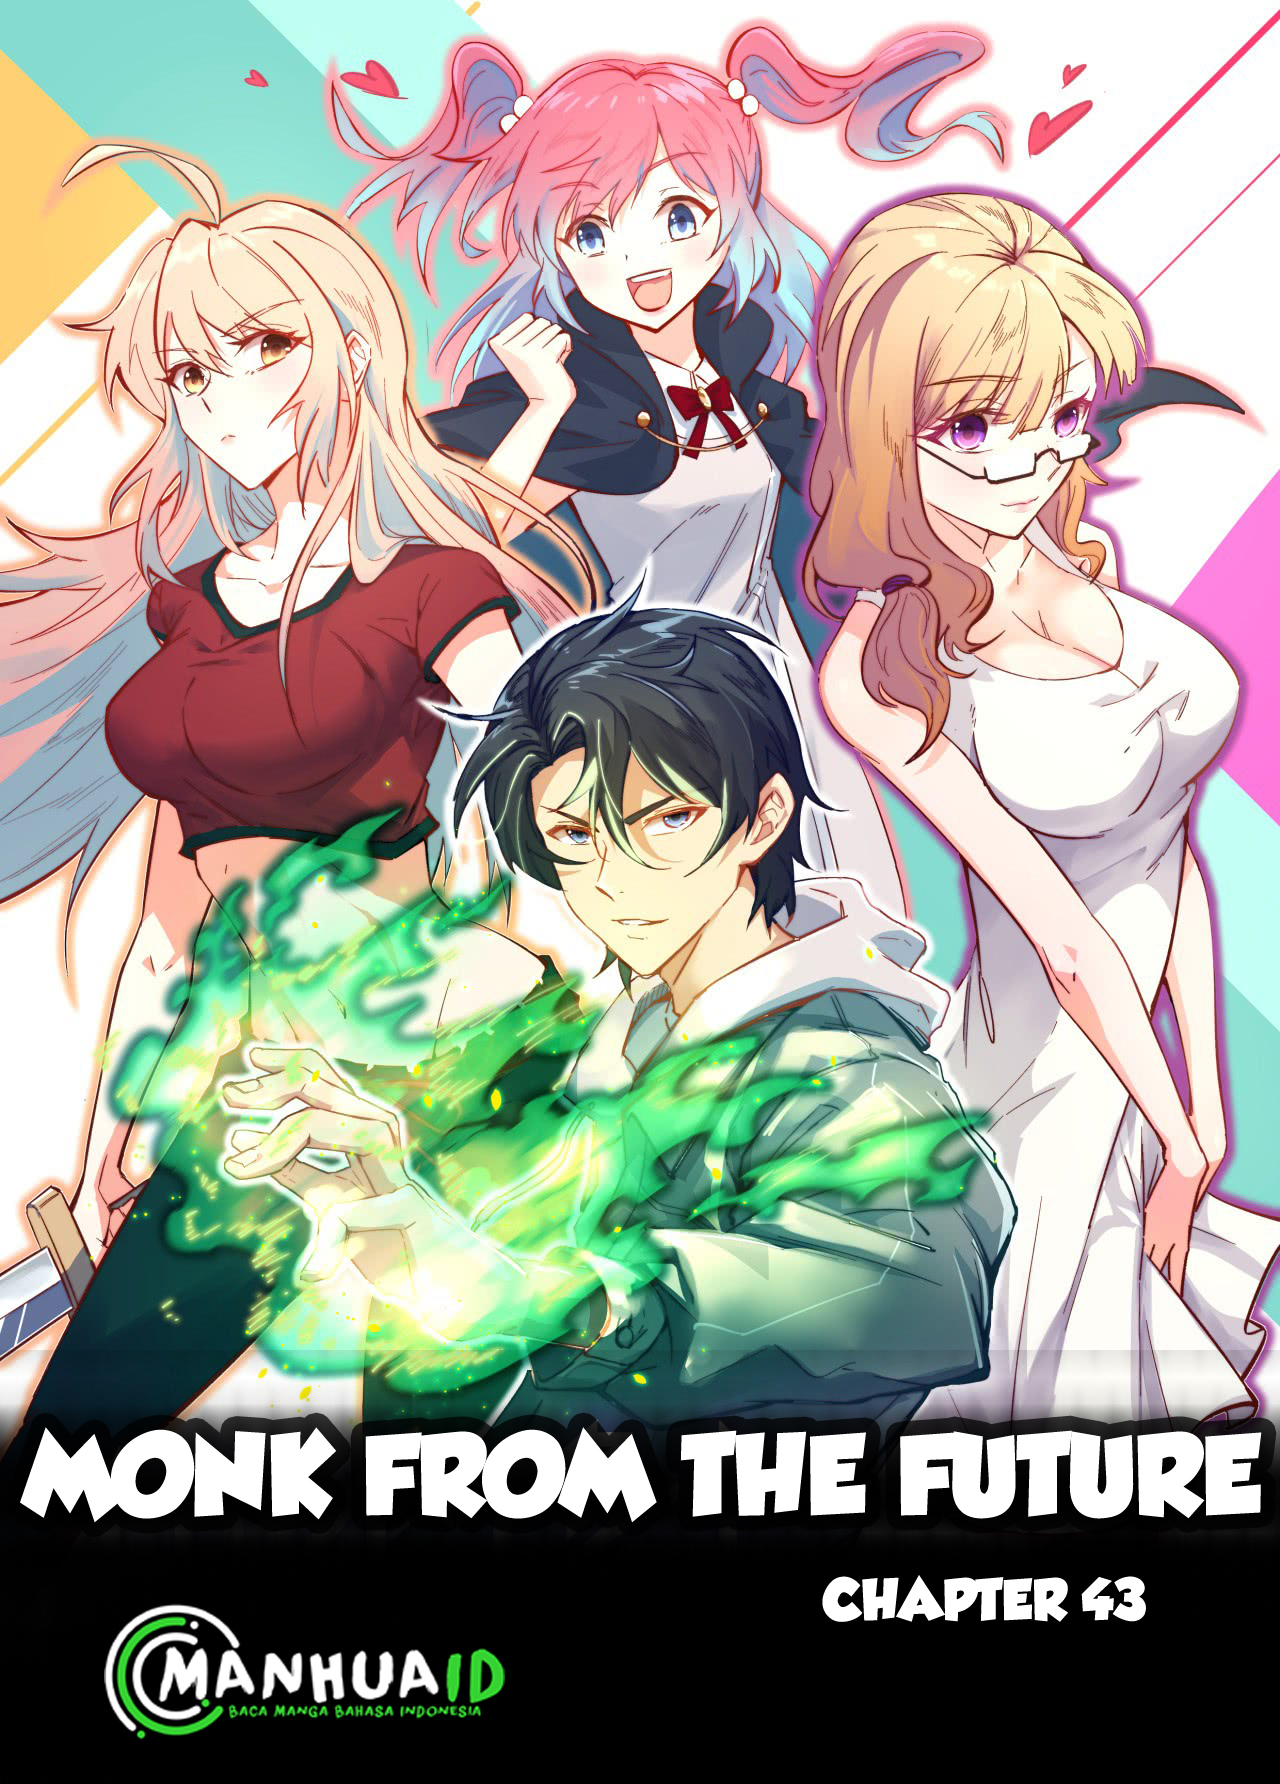 Monk From the Future Chapter 43